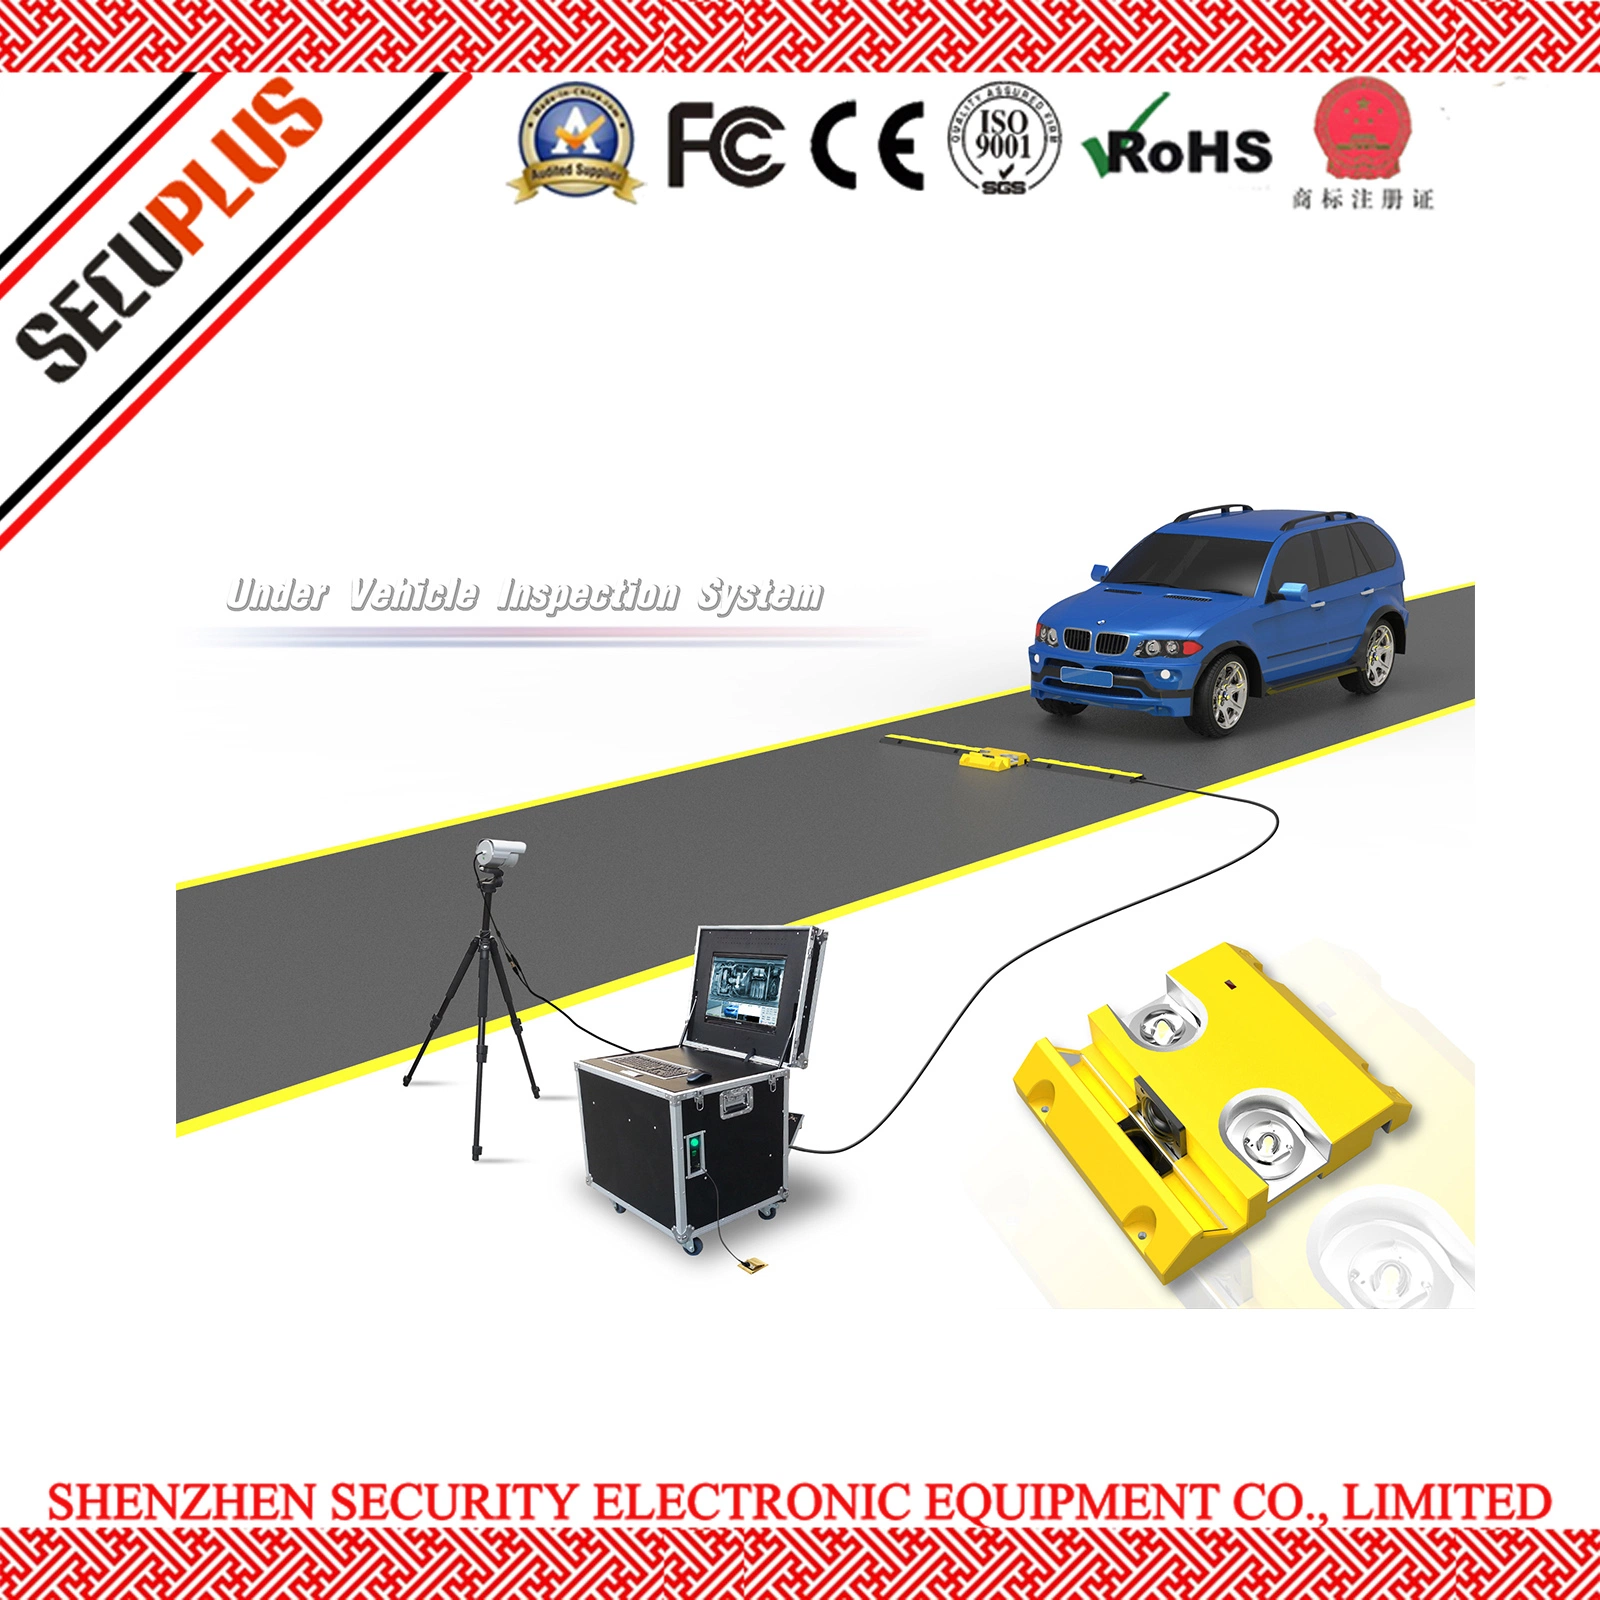 Colored Under Vehicle Inspection System to Check Car Contraband